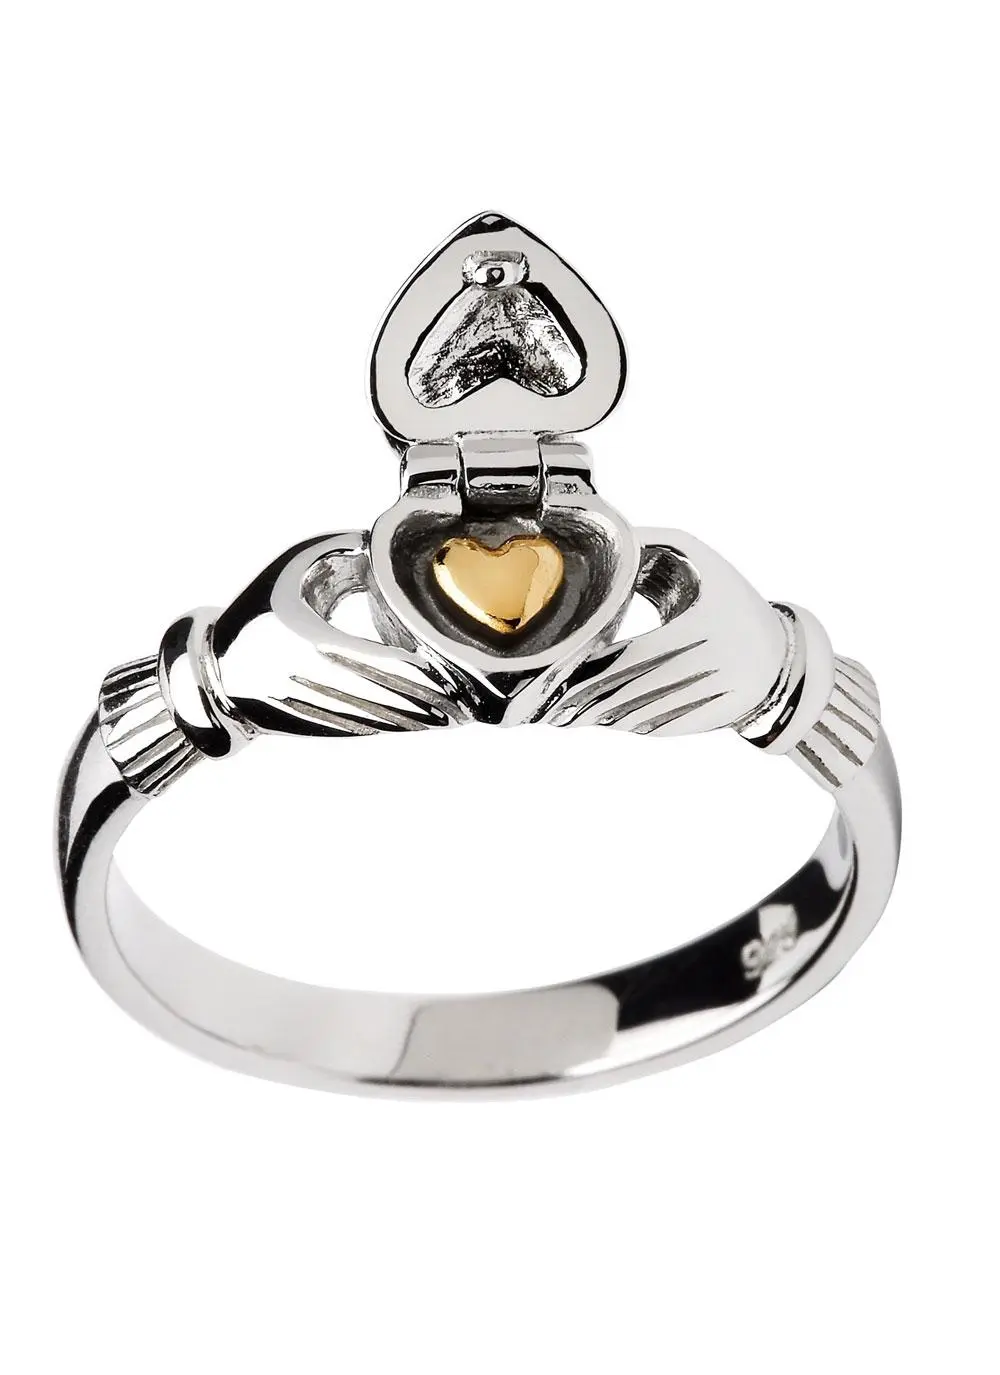 Claddagh Rings: History, Meaning, and Lore